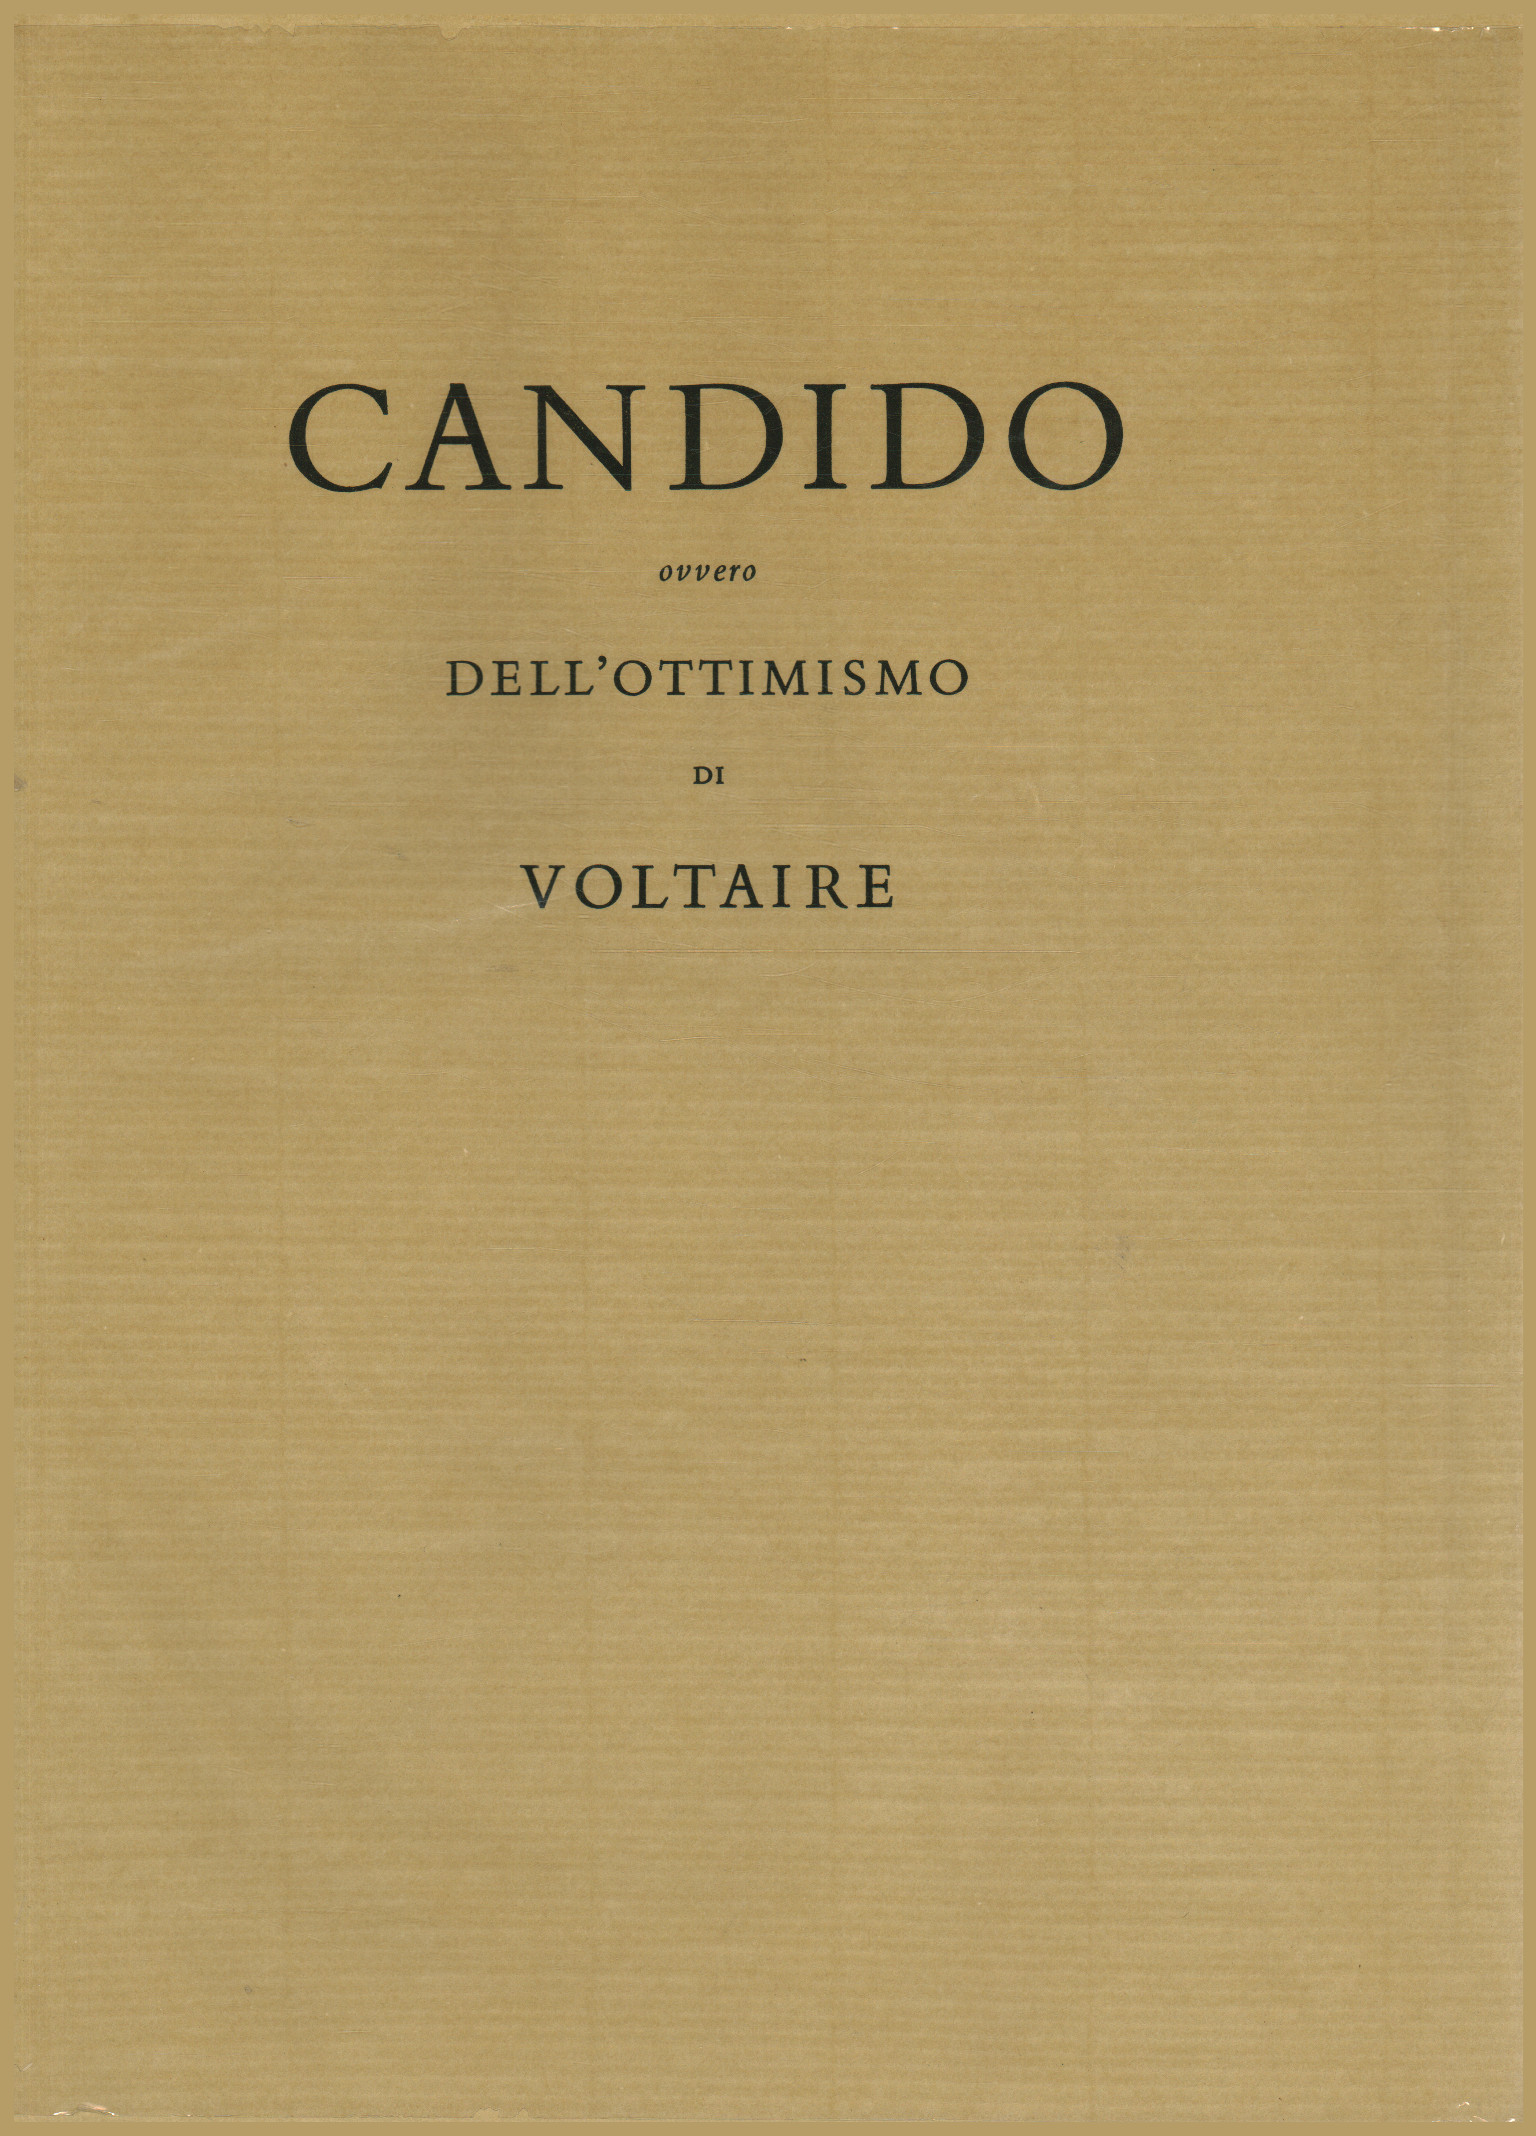 Candide or of Voltaire's optimism, AA.VV